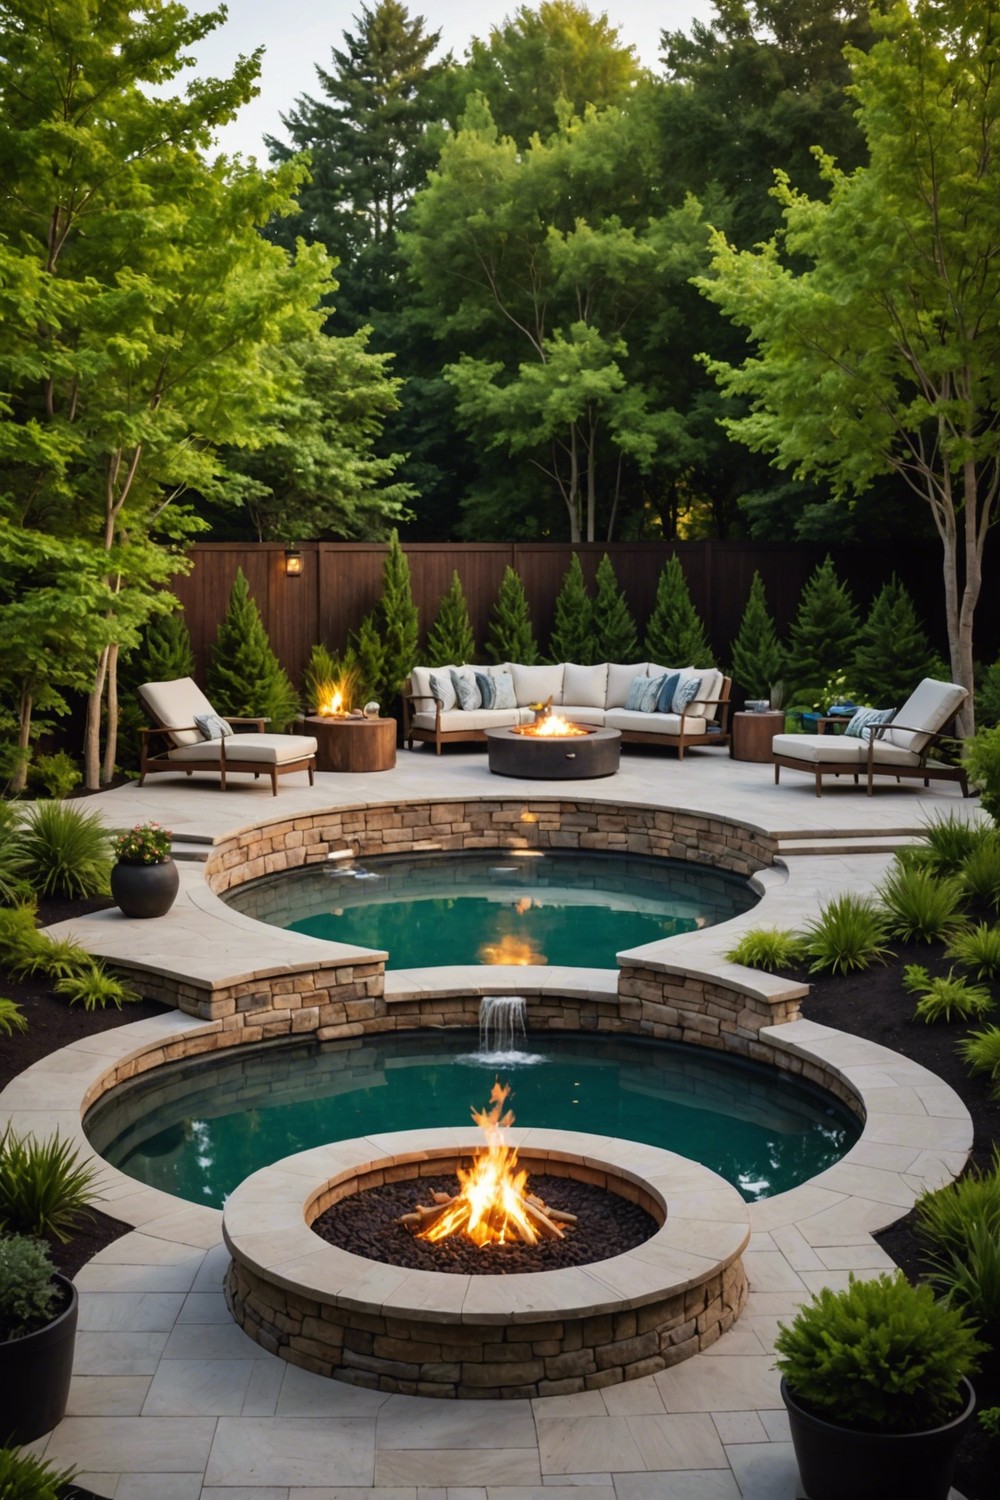 Round Pool with Fire Pit